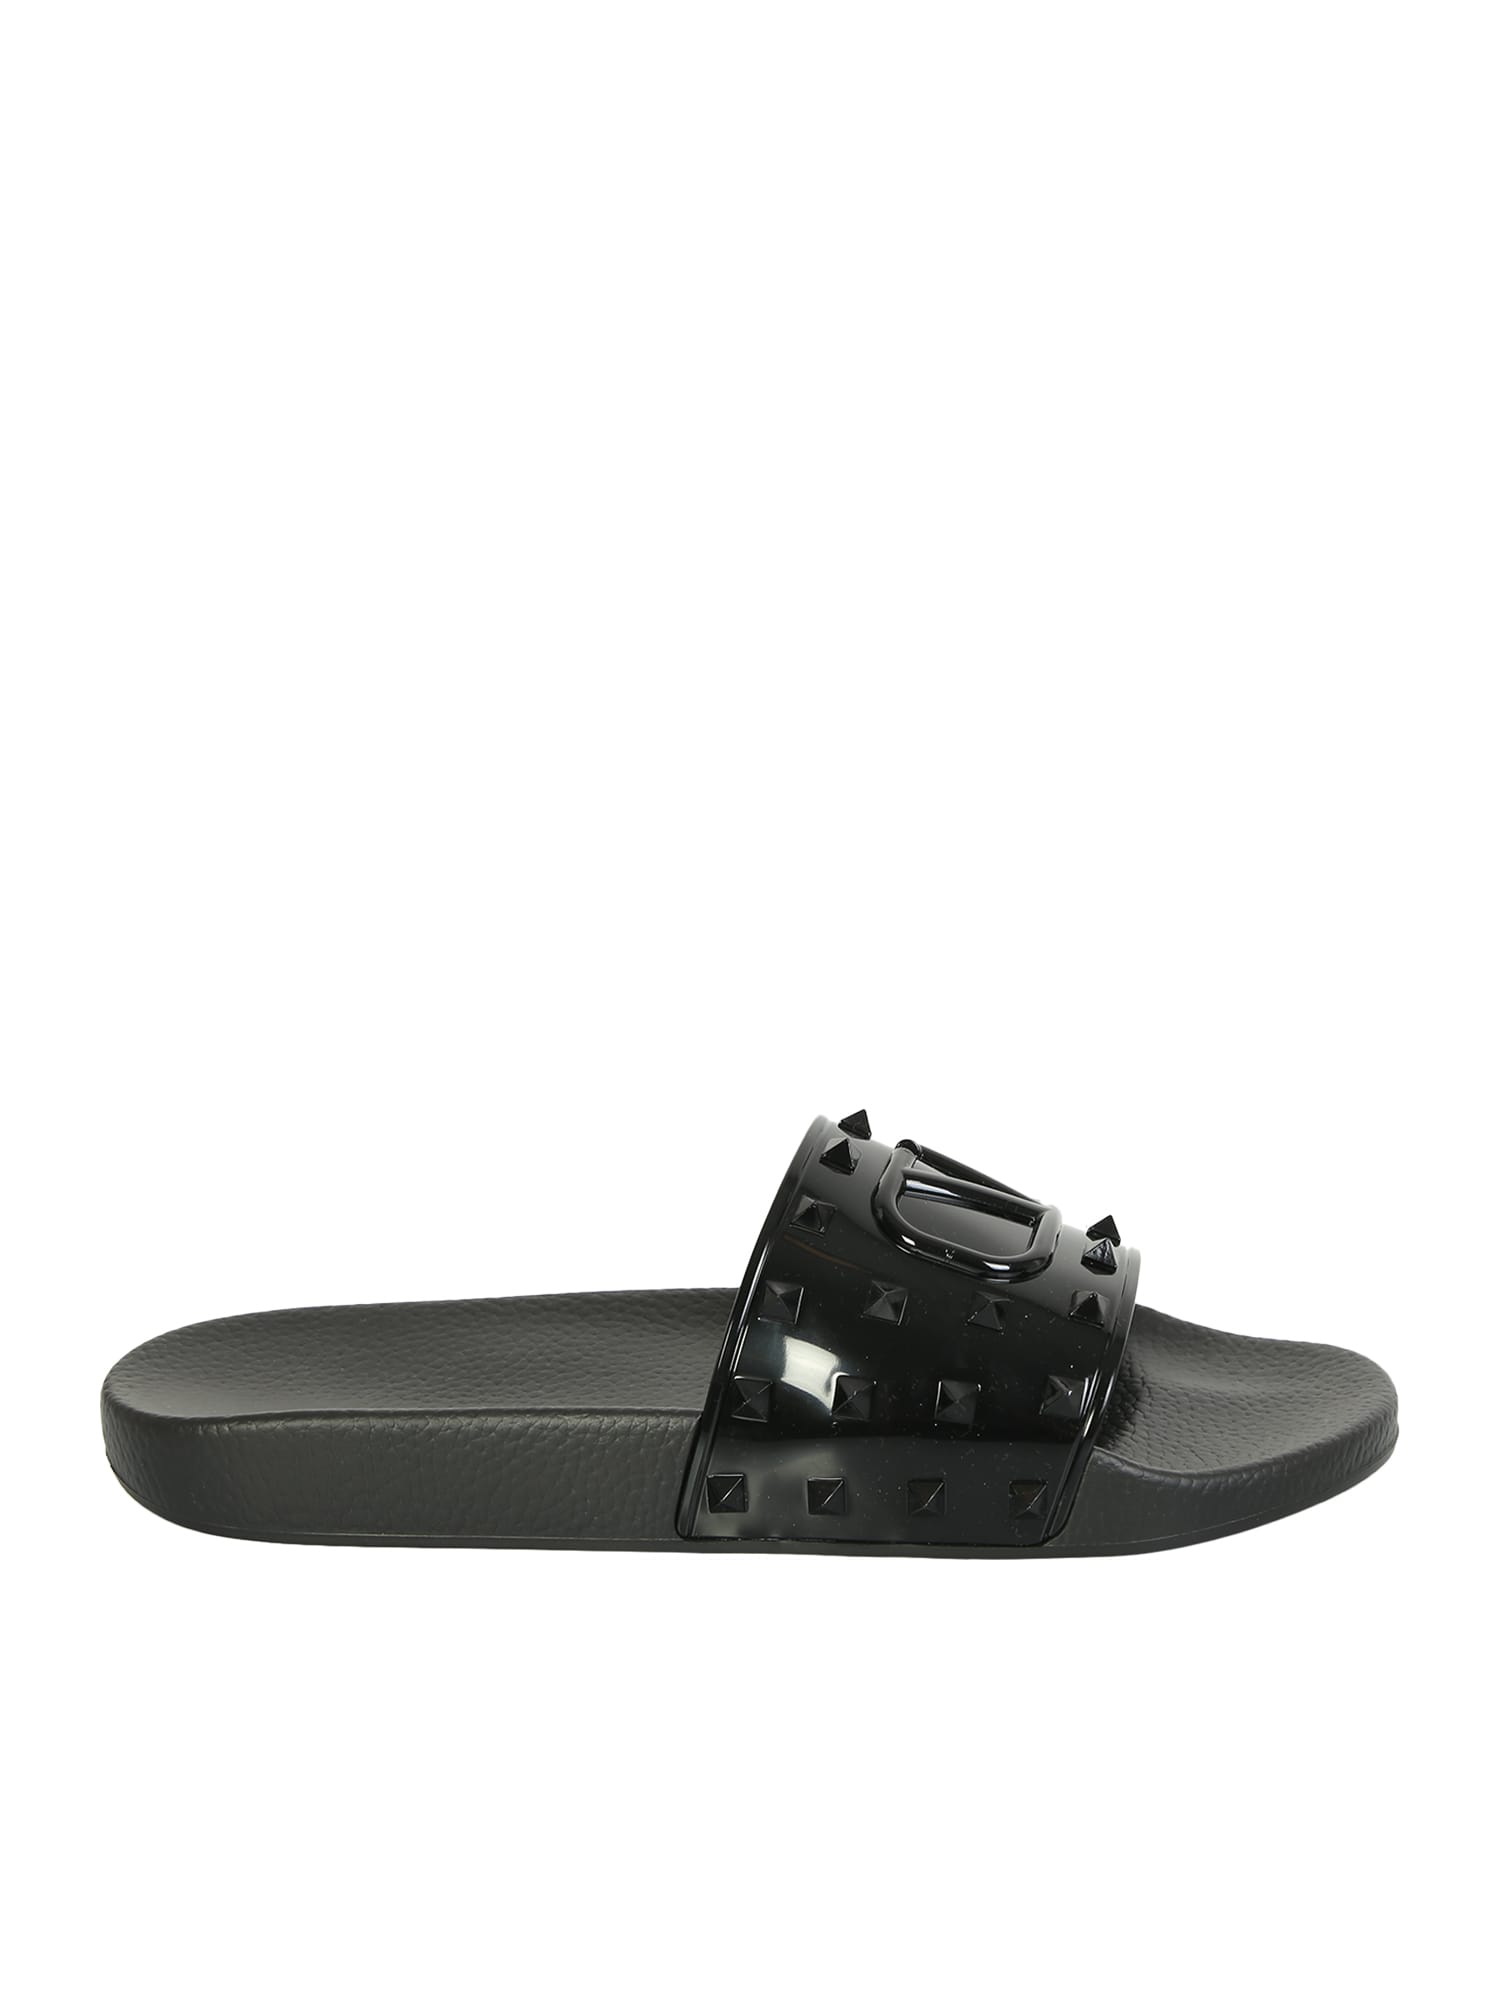 Vlogo Rockstud Slides By Valentino Garavani Are The Perfect Combo Between Comfort And Elegance